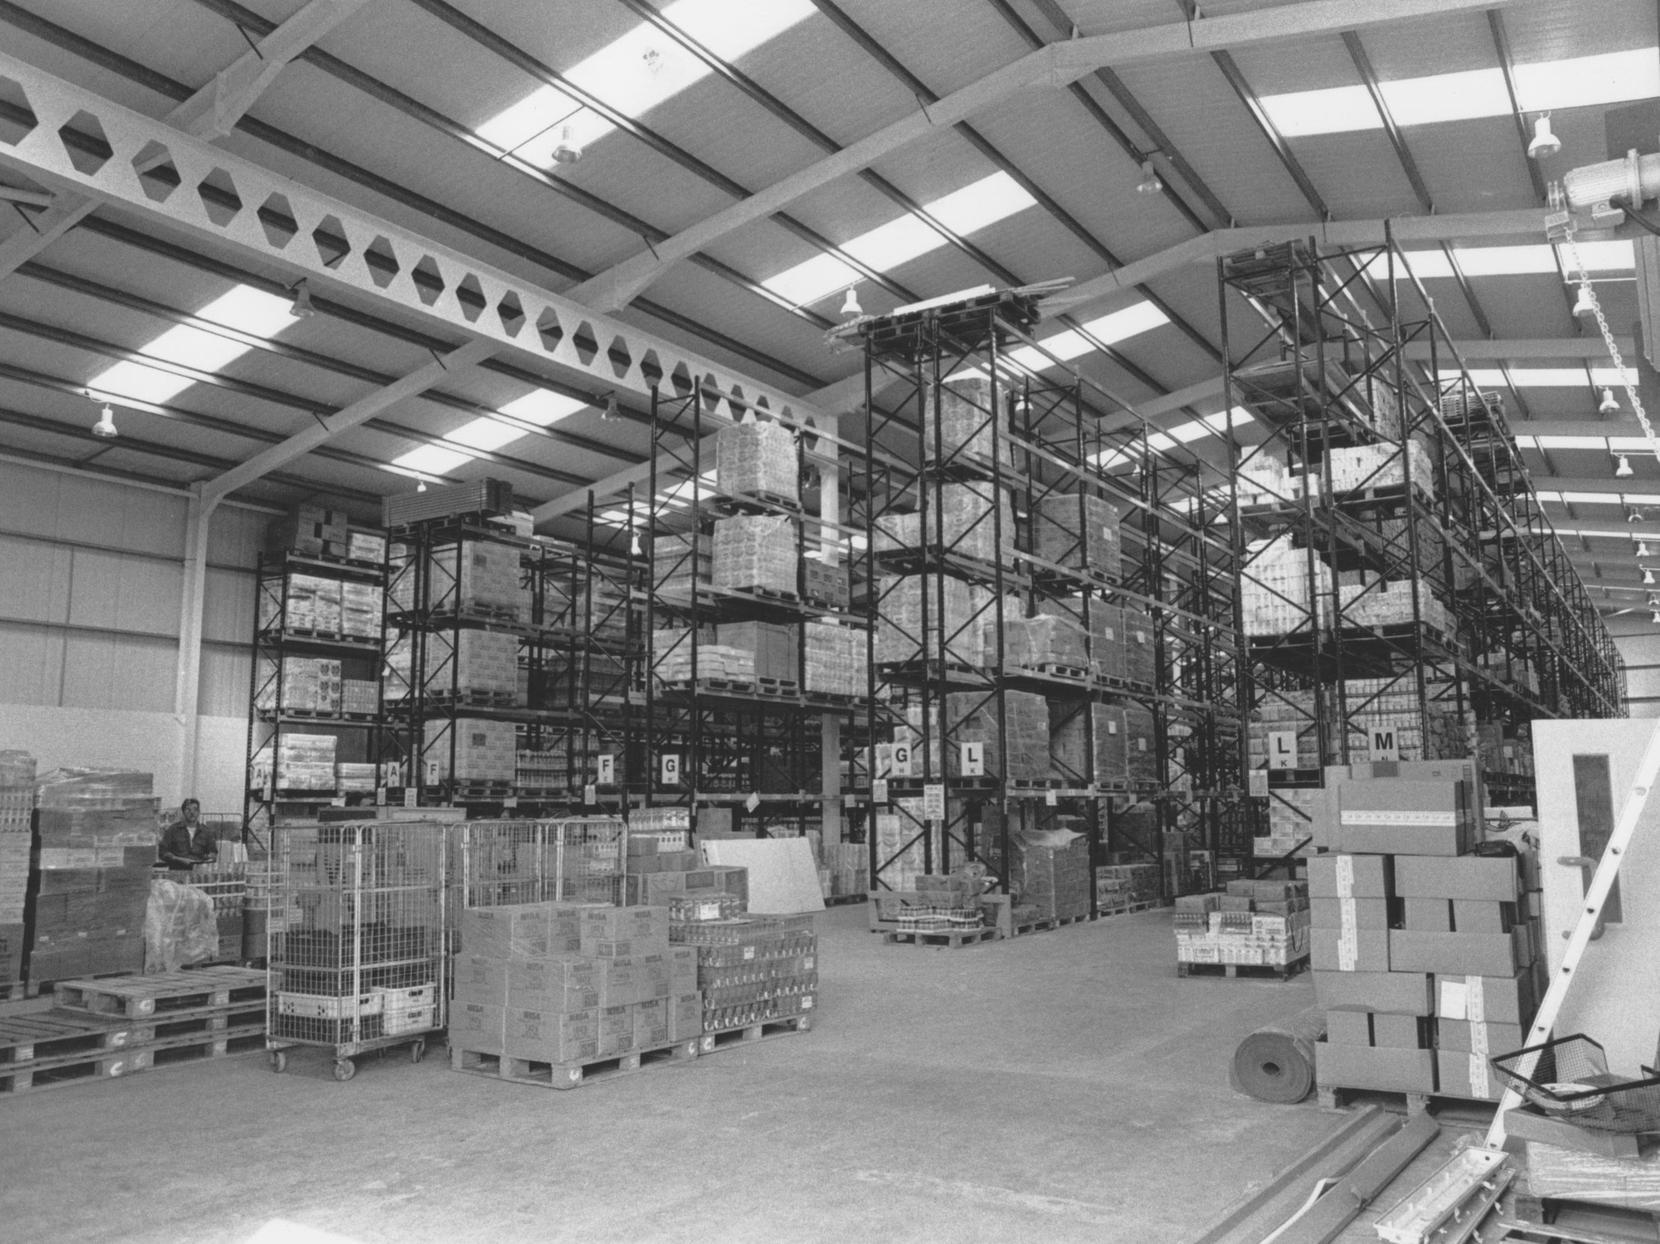 Inside the then newly built warehouse at Eastfield, in 1992